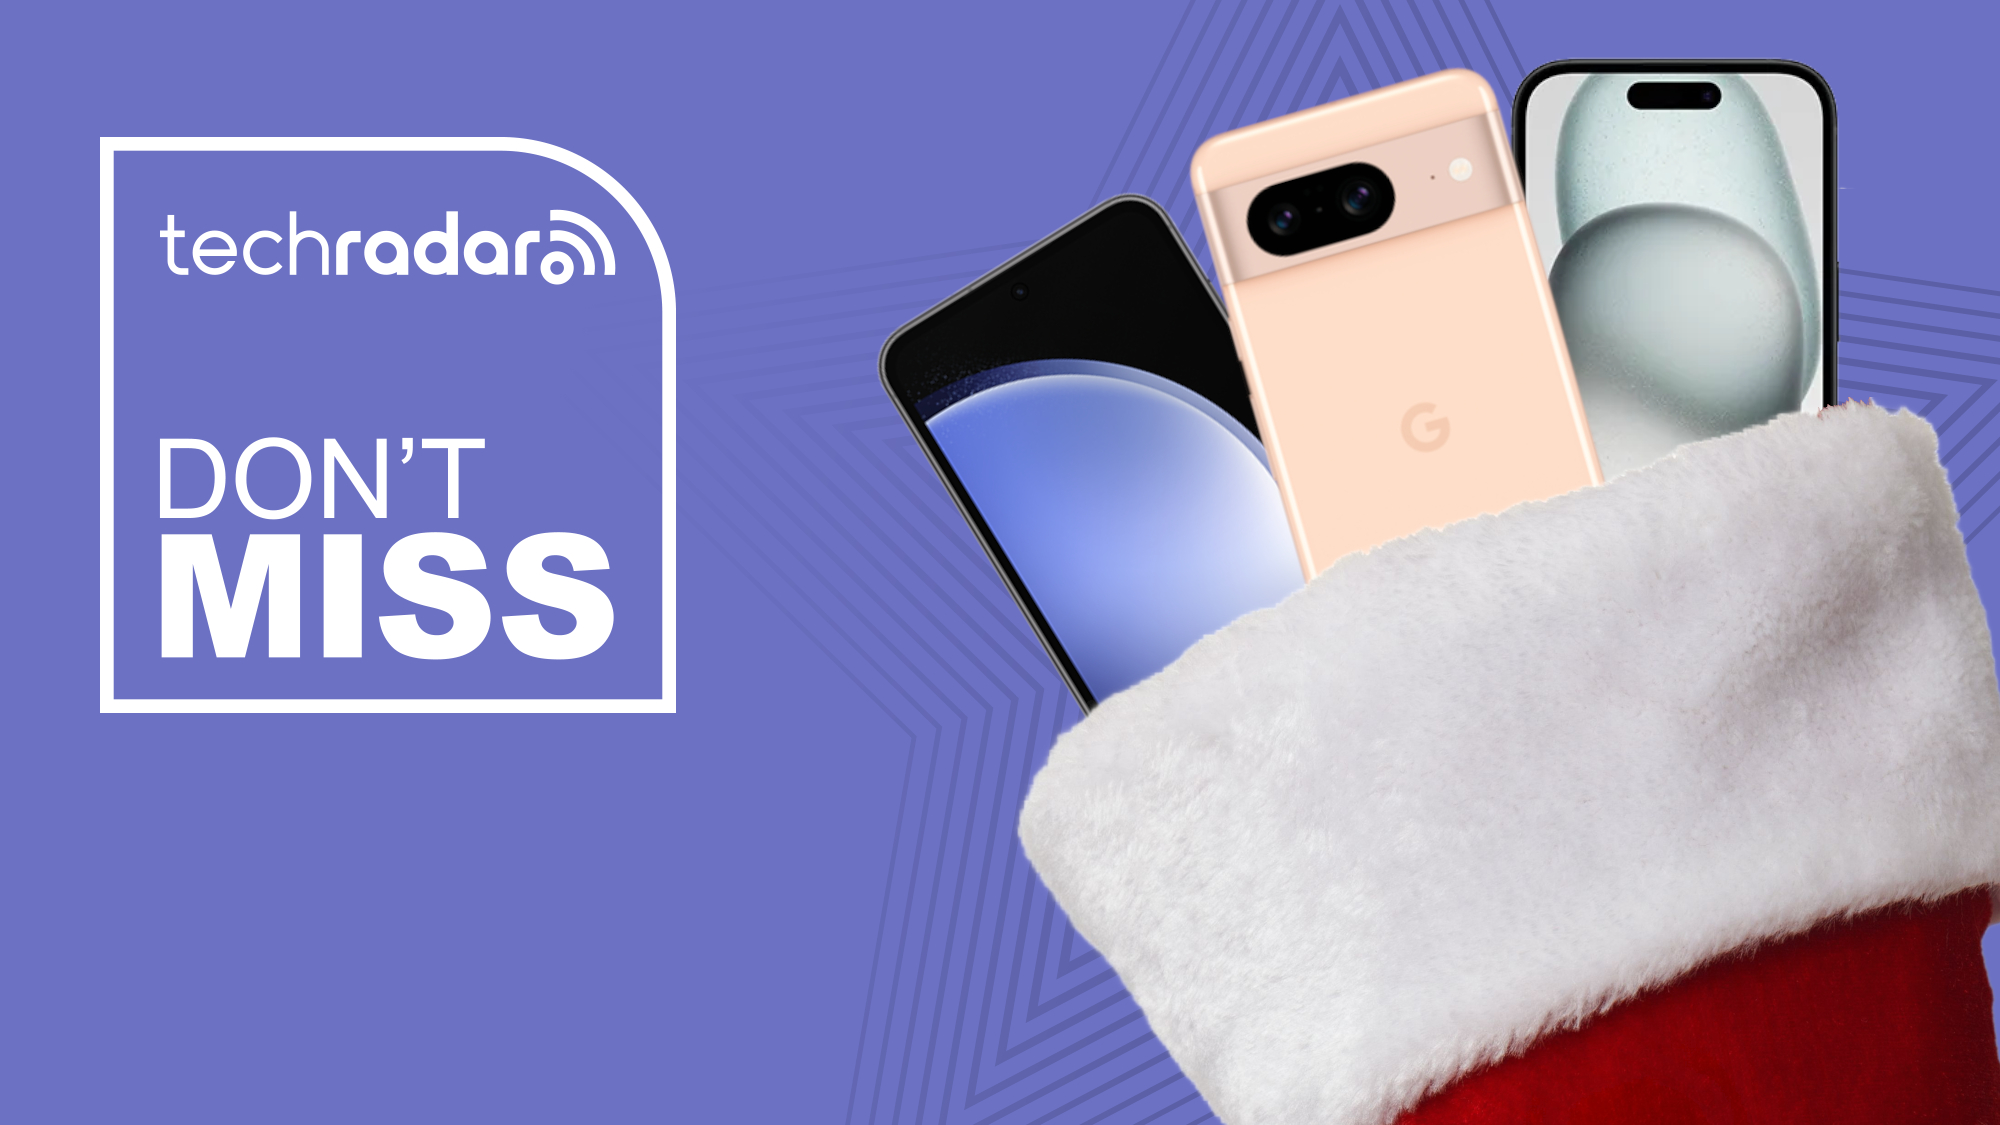 Save up to £427 on the latest smartphones with Three’s Christmas sale